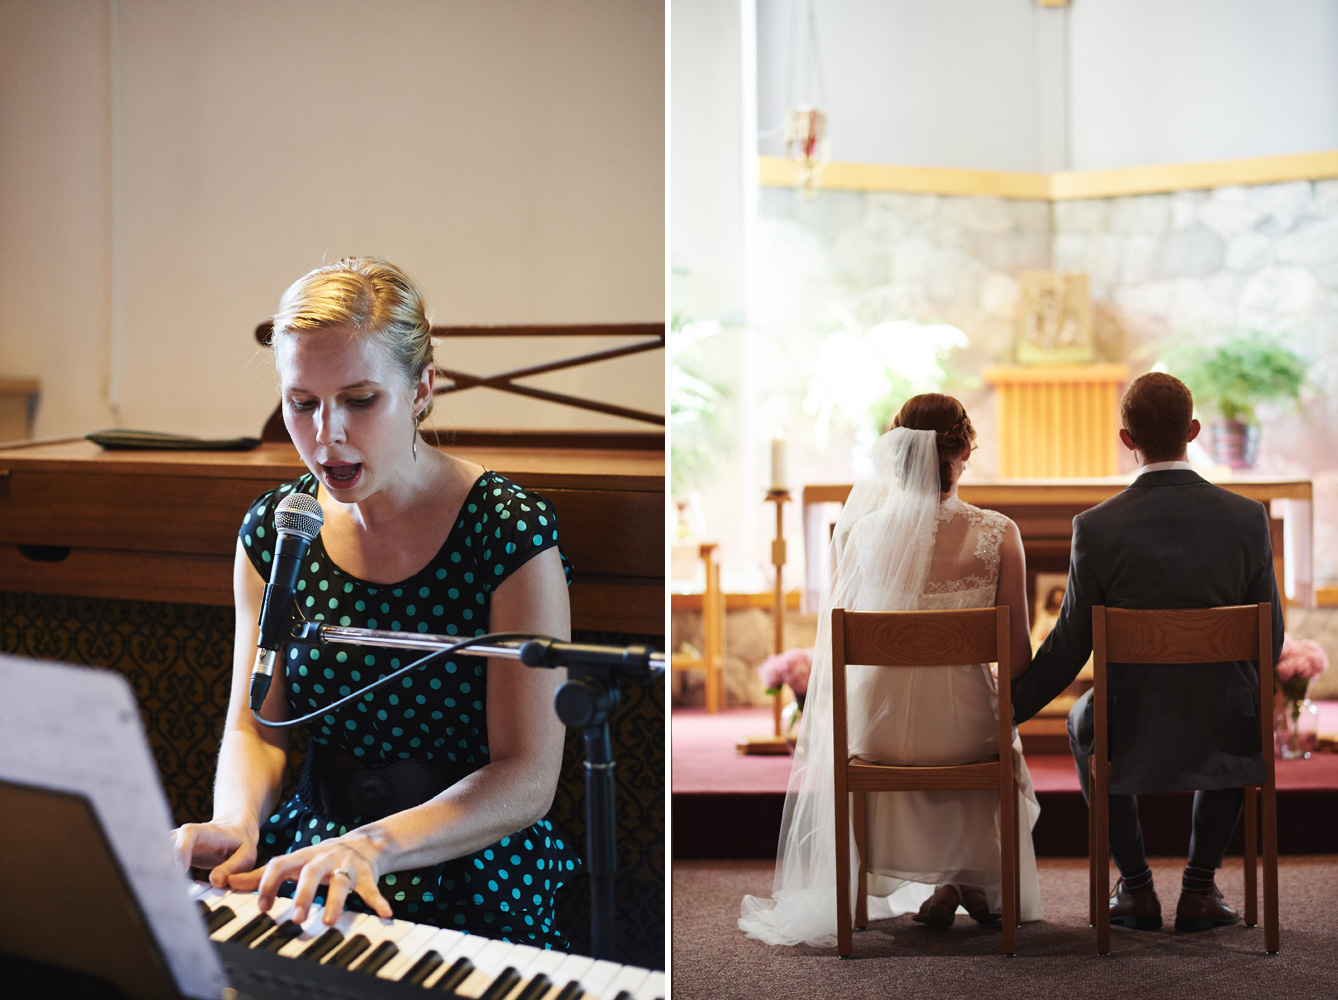 wedding-singer-in-ceremony-playing-the-piano.jpg